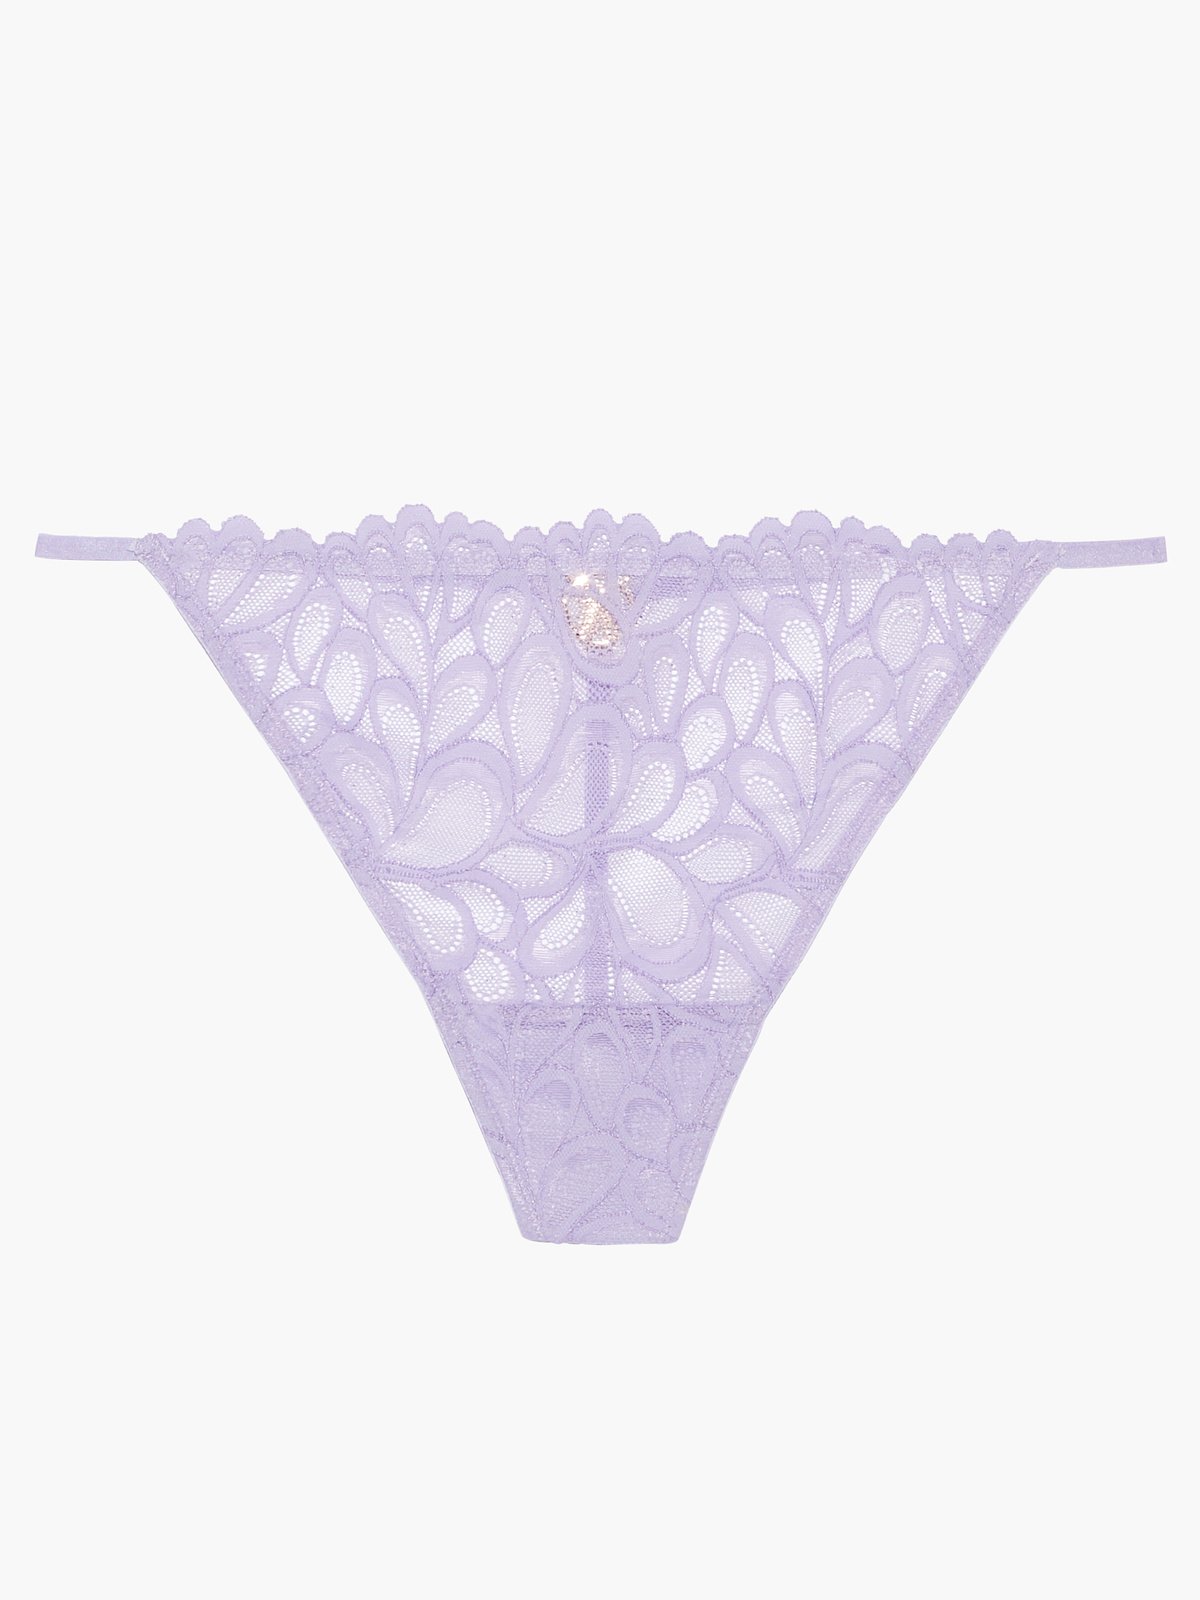 https://cdn.savagex.com/media/images/products/UD2042925-5210/SAVAGE-NOT-SORRY-LACE-STRING-THONG-UD2042925-5210-LAYDOWN-1200x1600.jpg